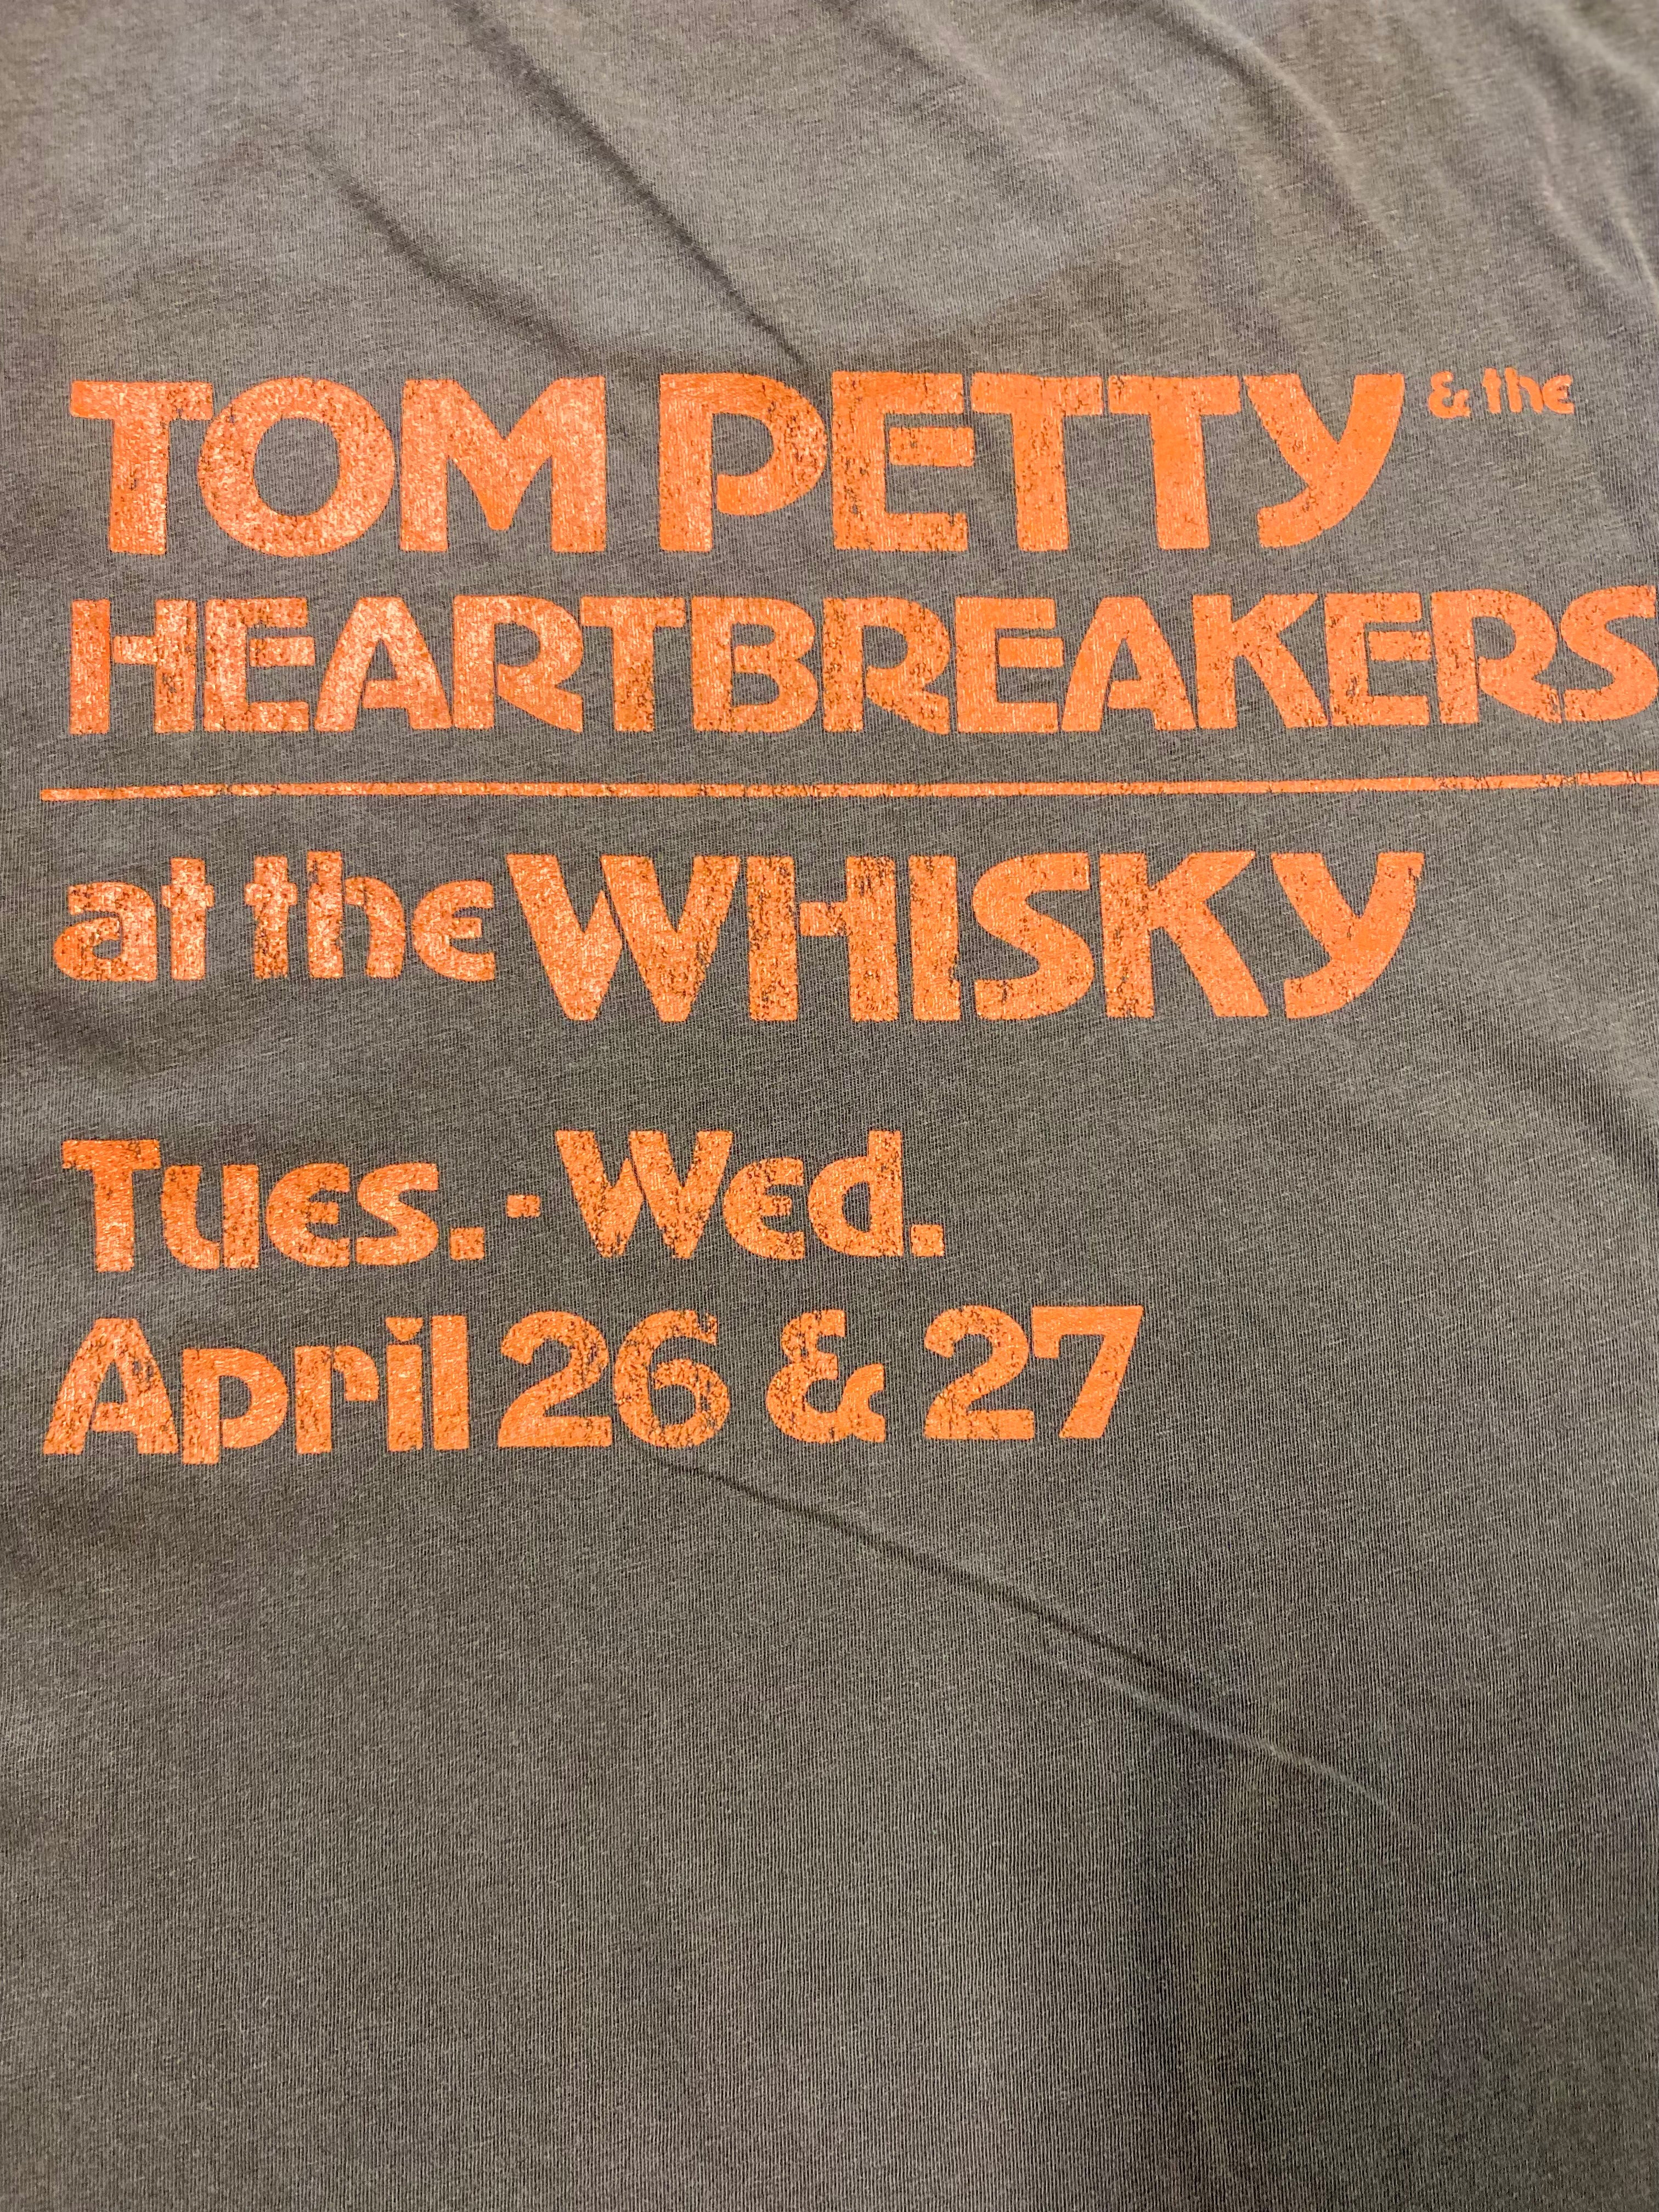 Tom Petty and the Heartbreakers at The Whiskey Muscle Tee